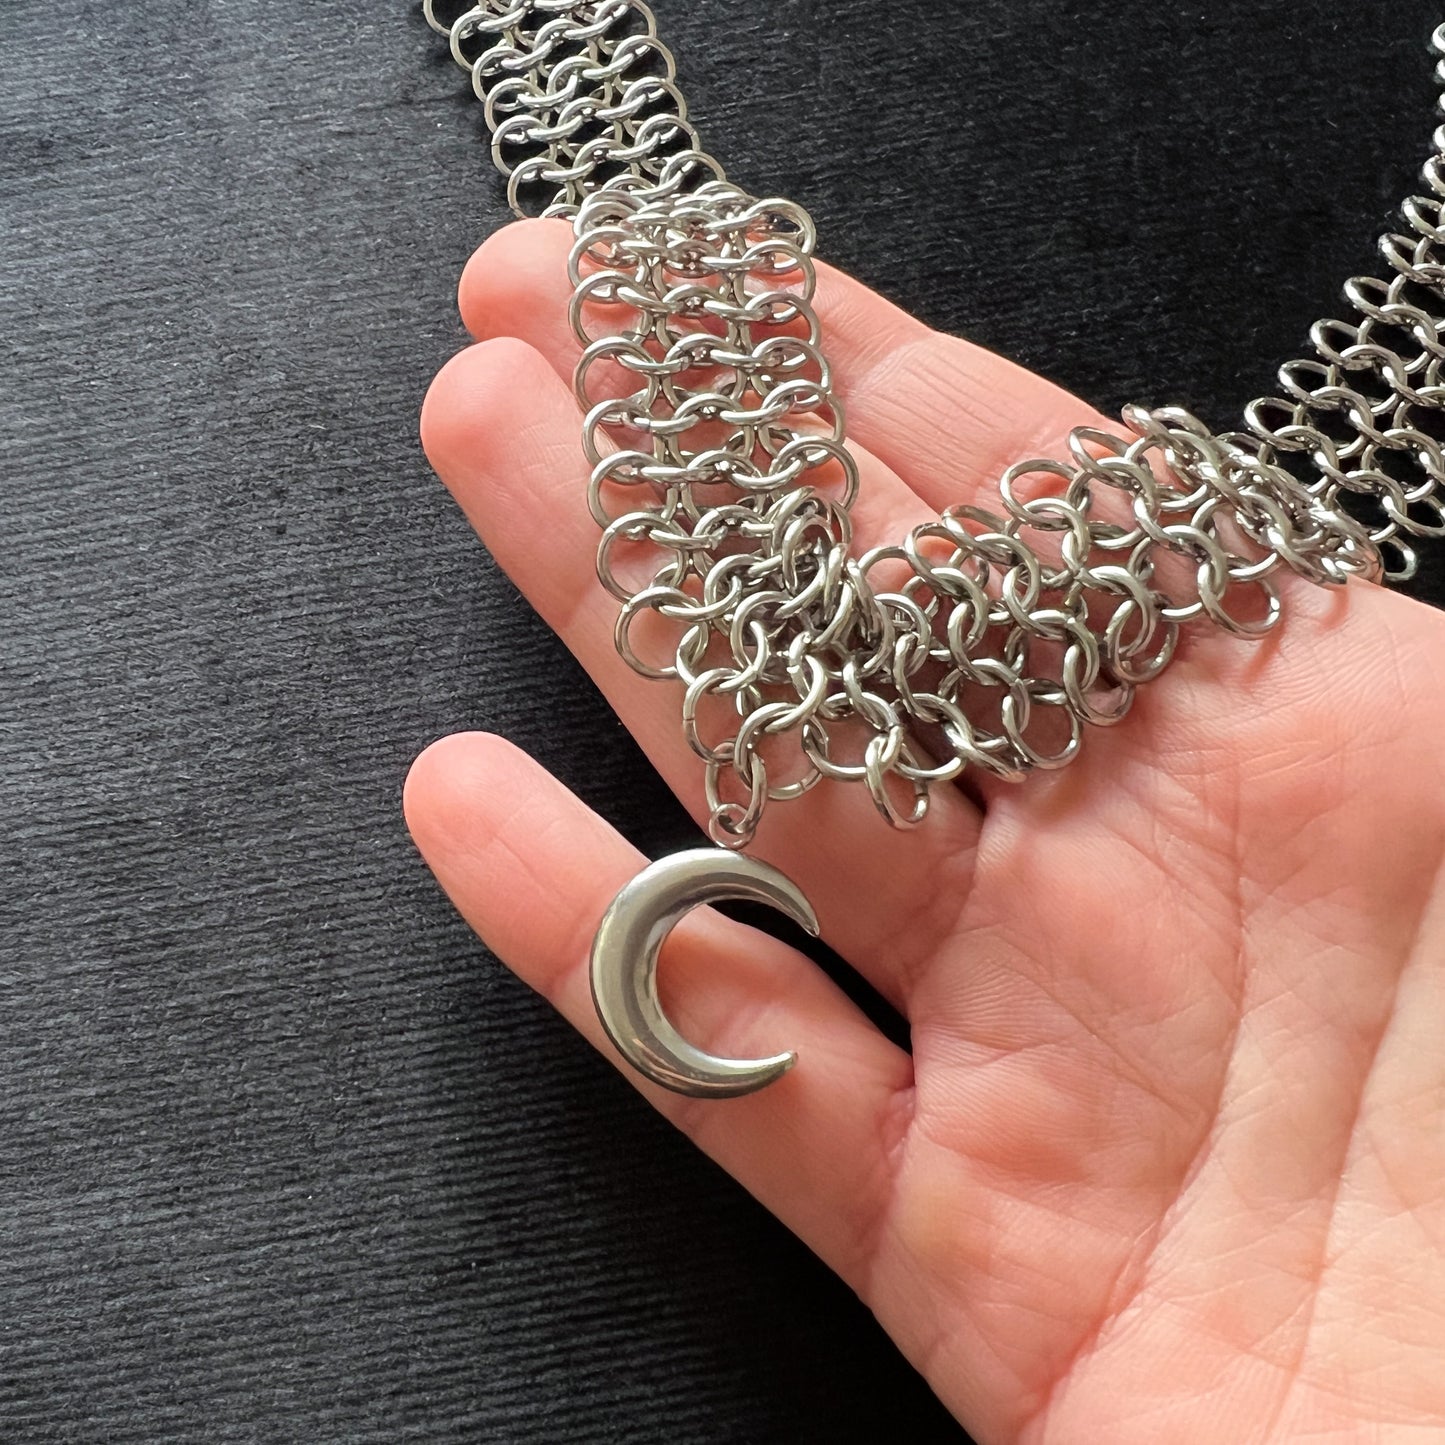 Moon crescent chainmail choker made of stainless steel European 4 in 1 chainmaille necklace gothic jewelry